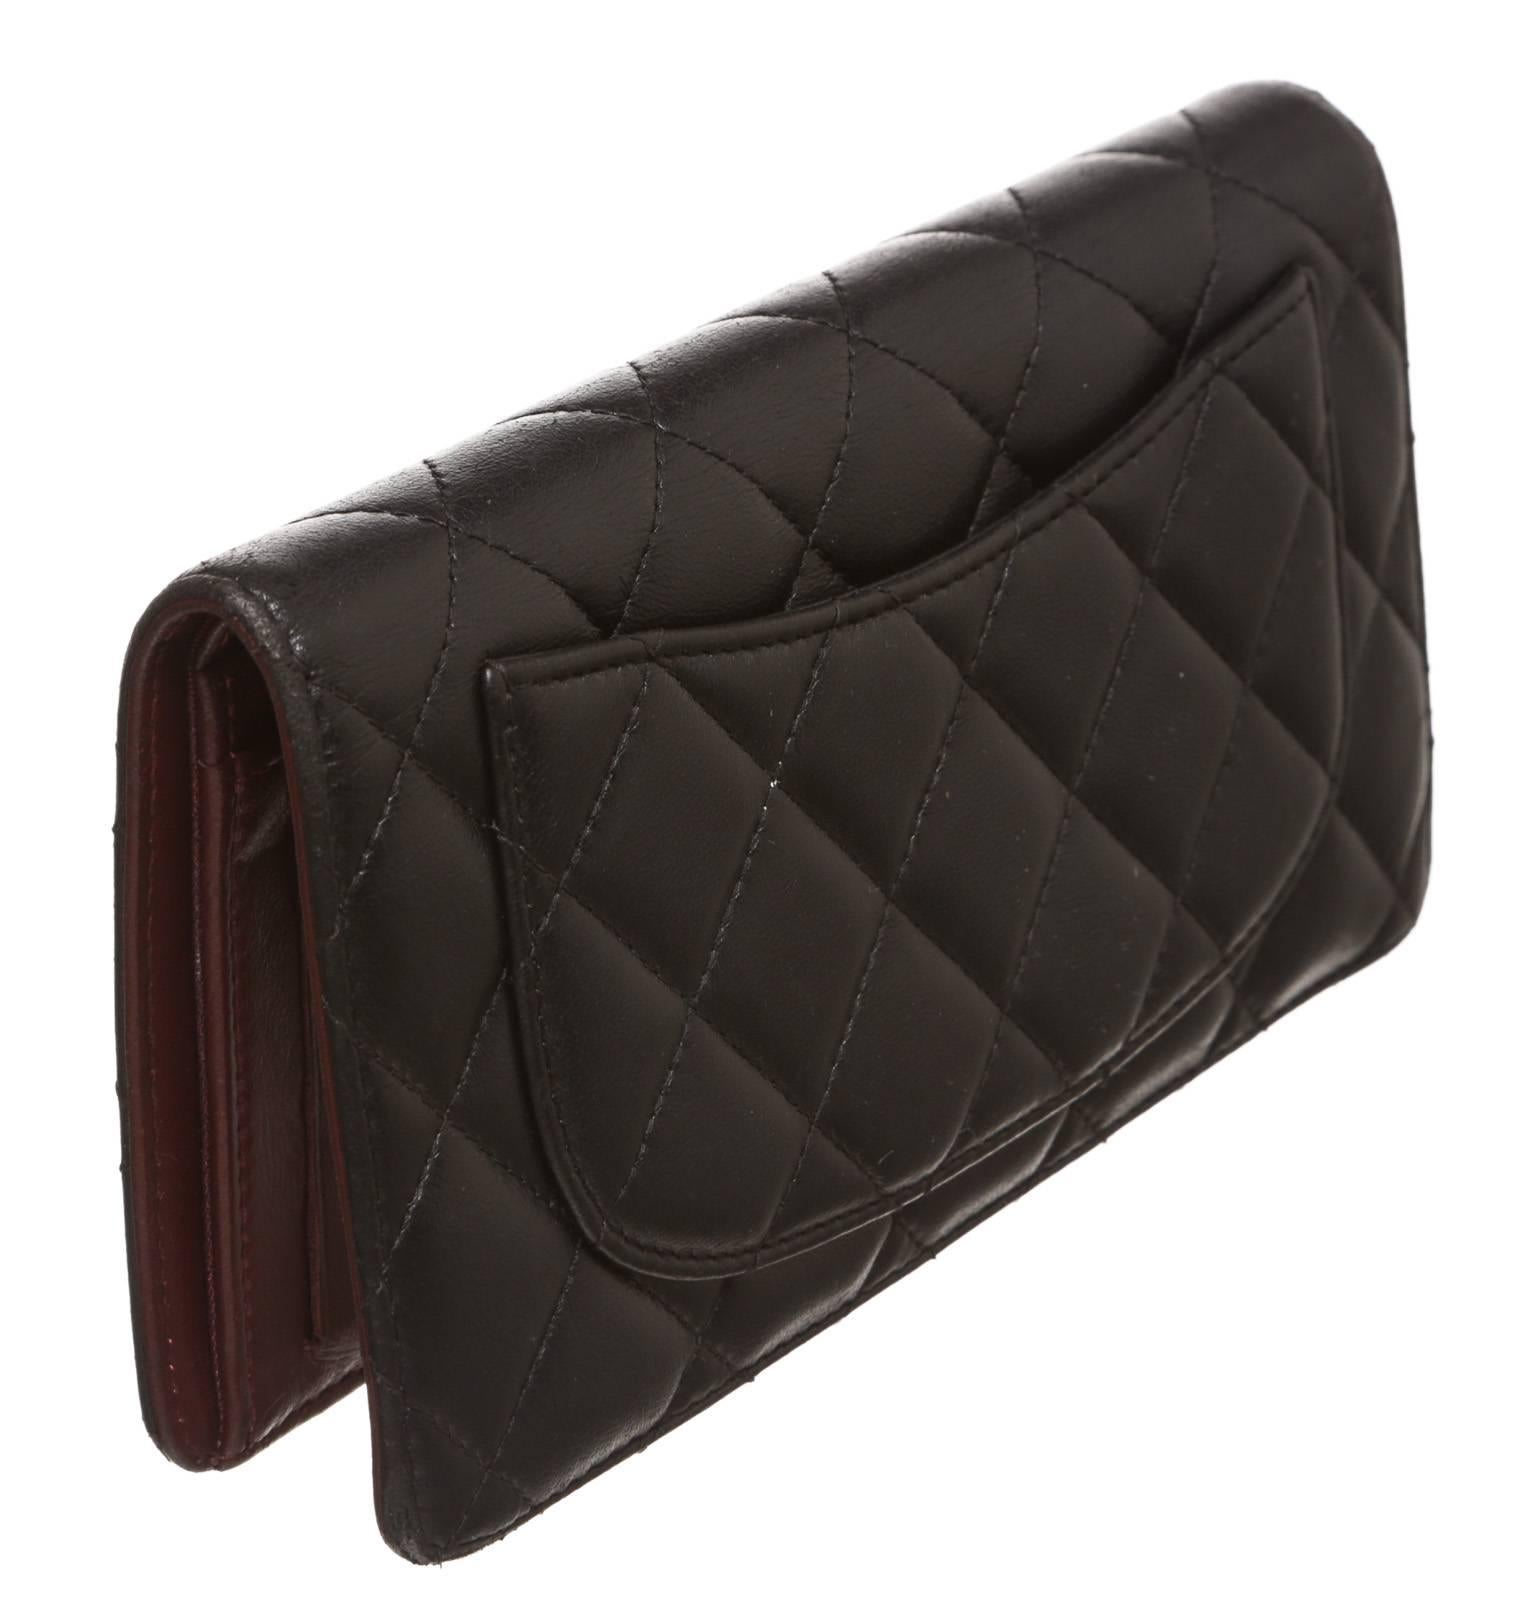 Stay organized with a beautiful lambskin bifold wallet from Chanel.